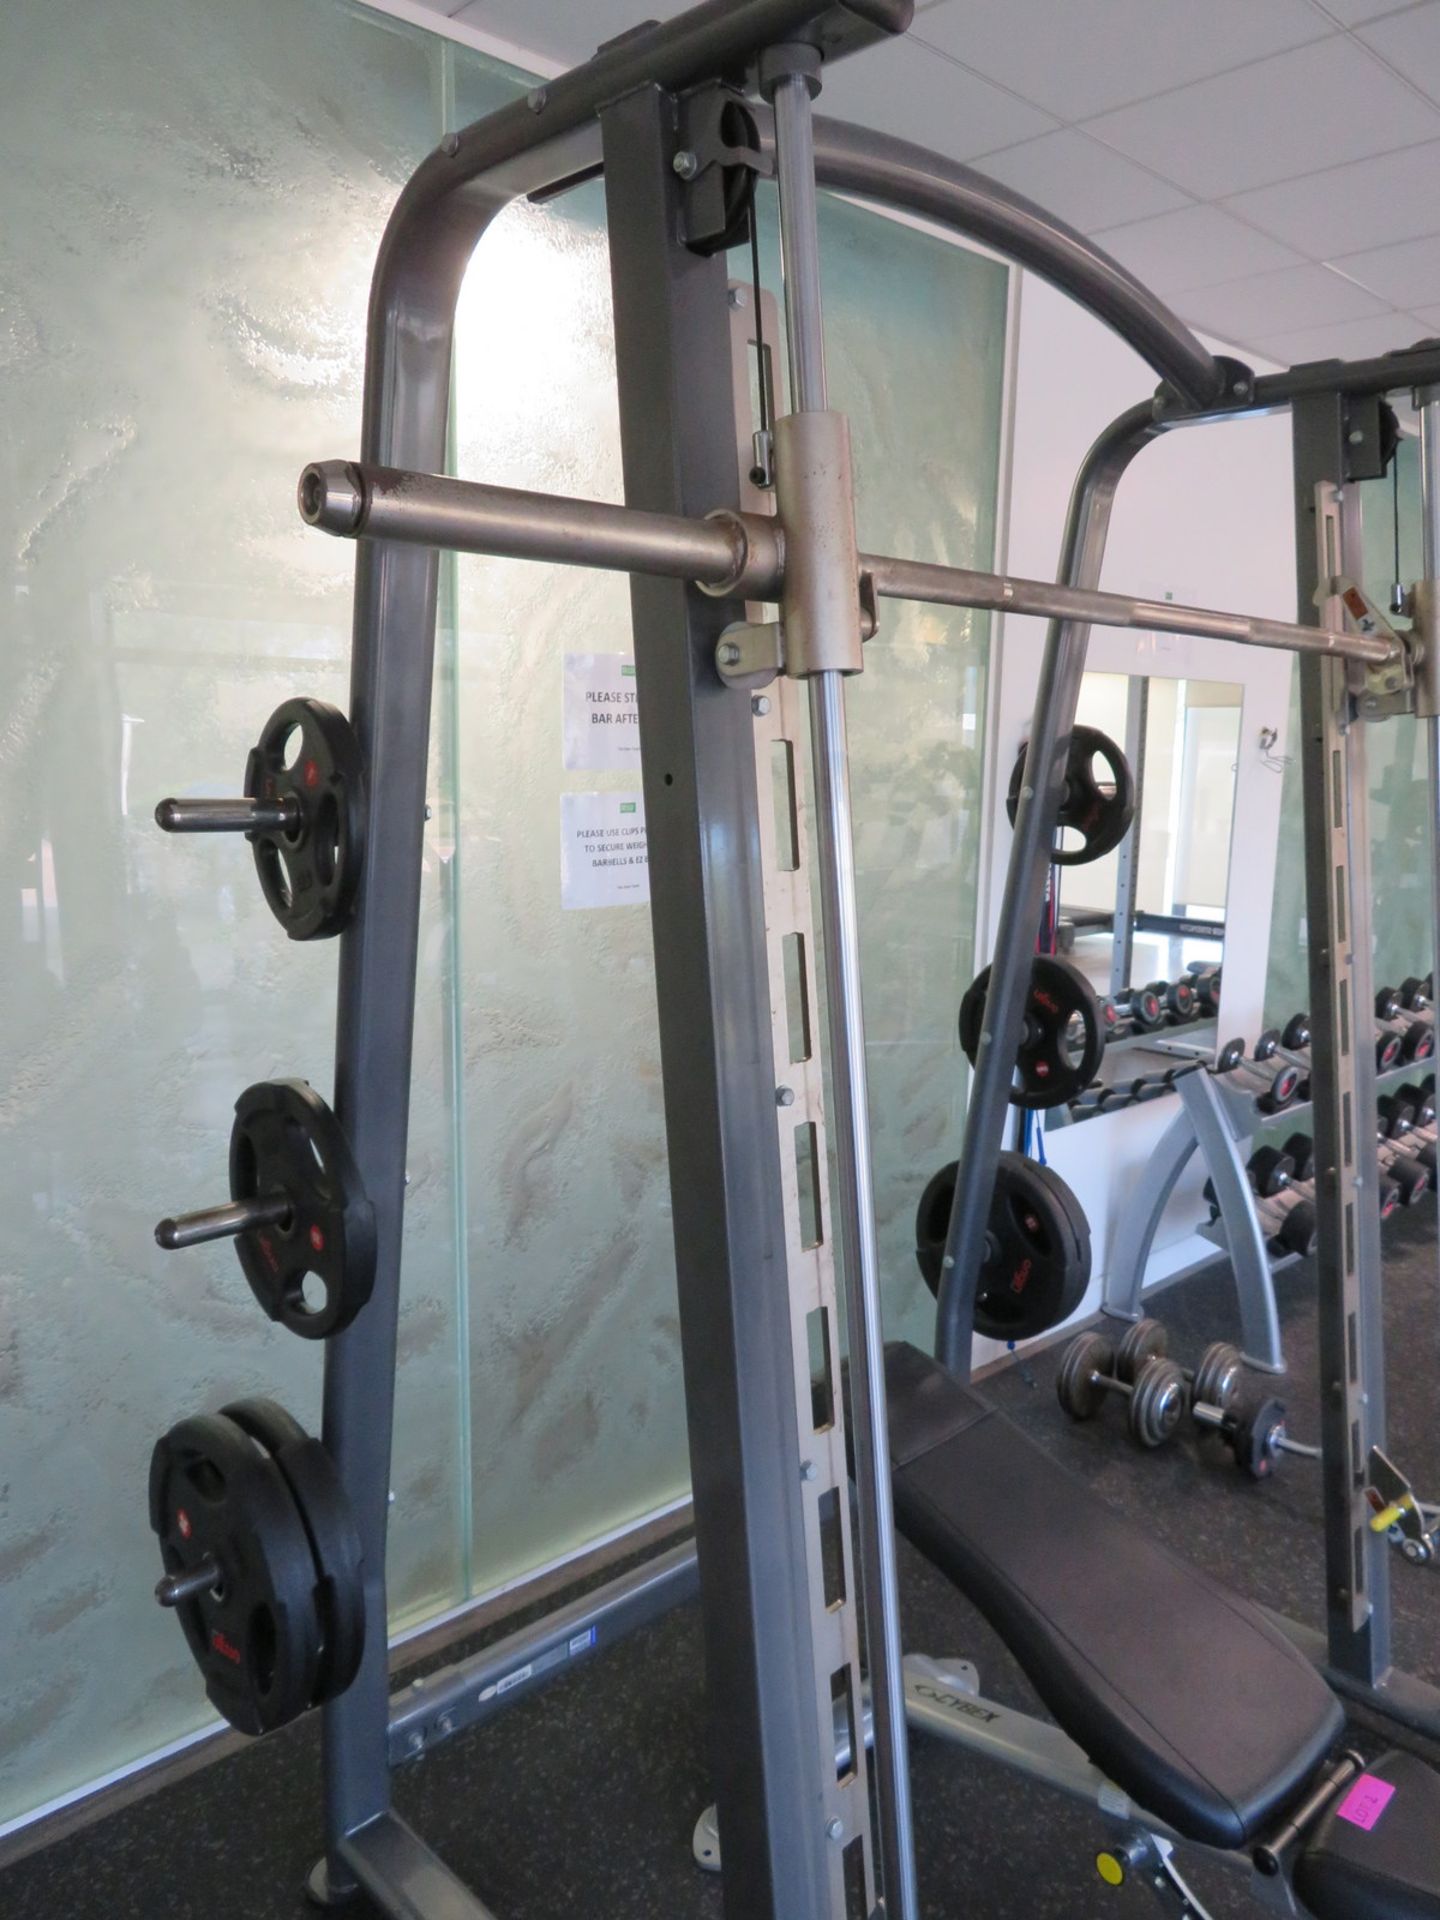 Gymgear Elite Series Smith Machine Complete With Cybex Bench & Weight Plates. - Image 5 of 12